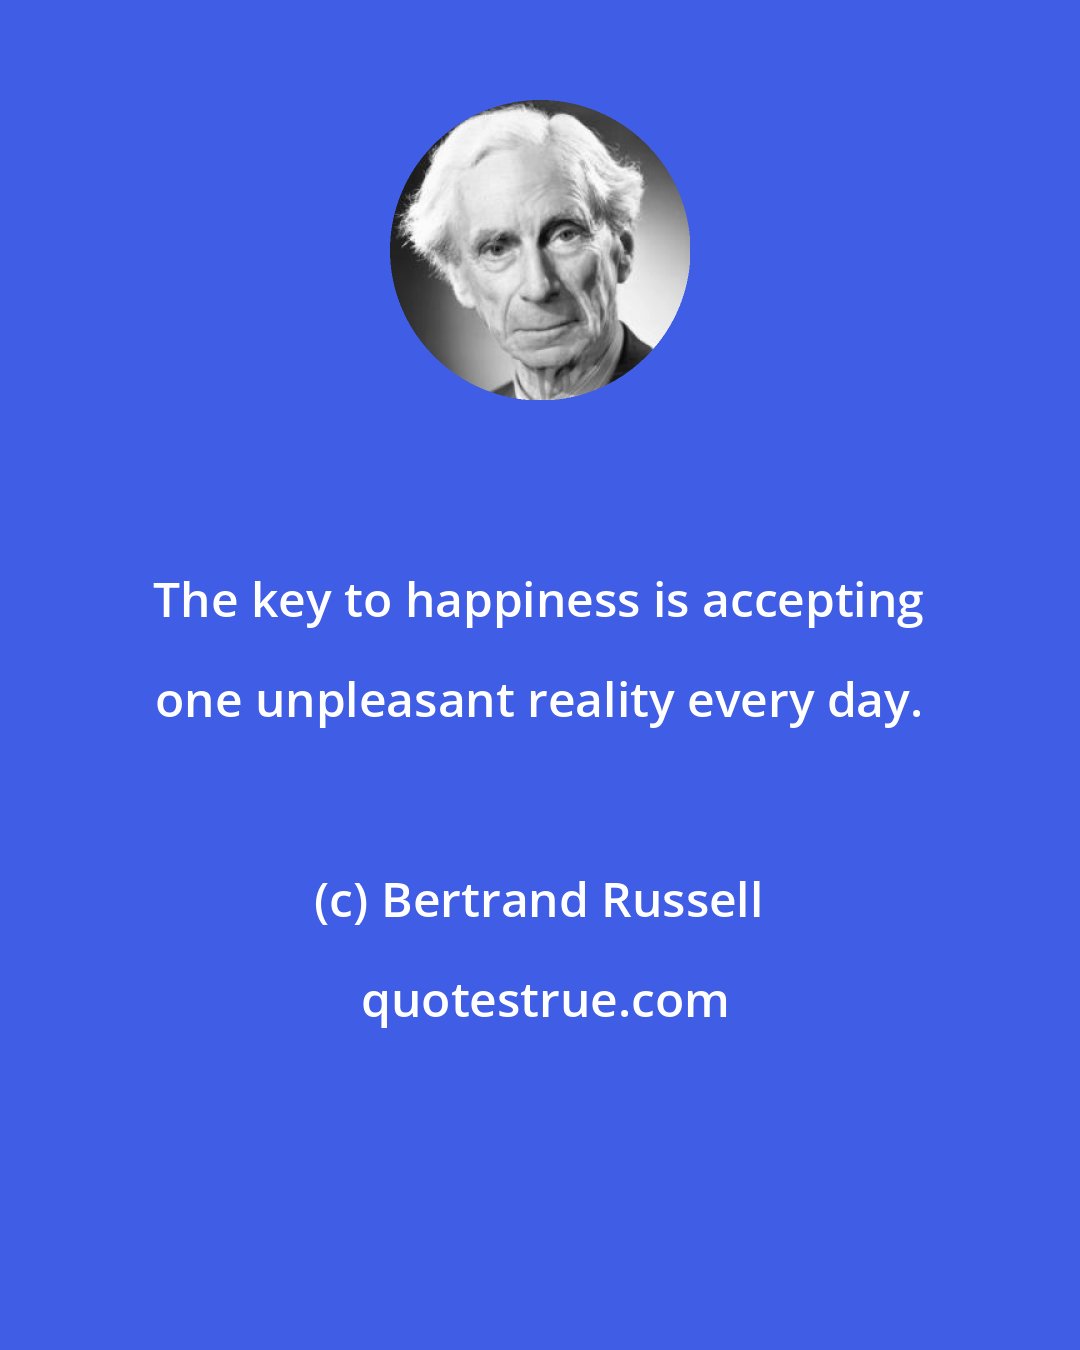 Bertrand Russell: The key to happiness is accepting one unpleasant reality every day.